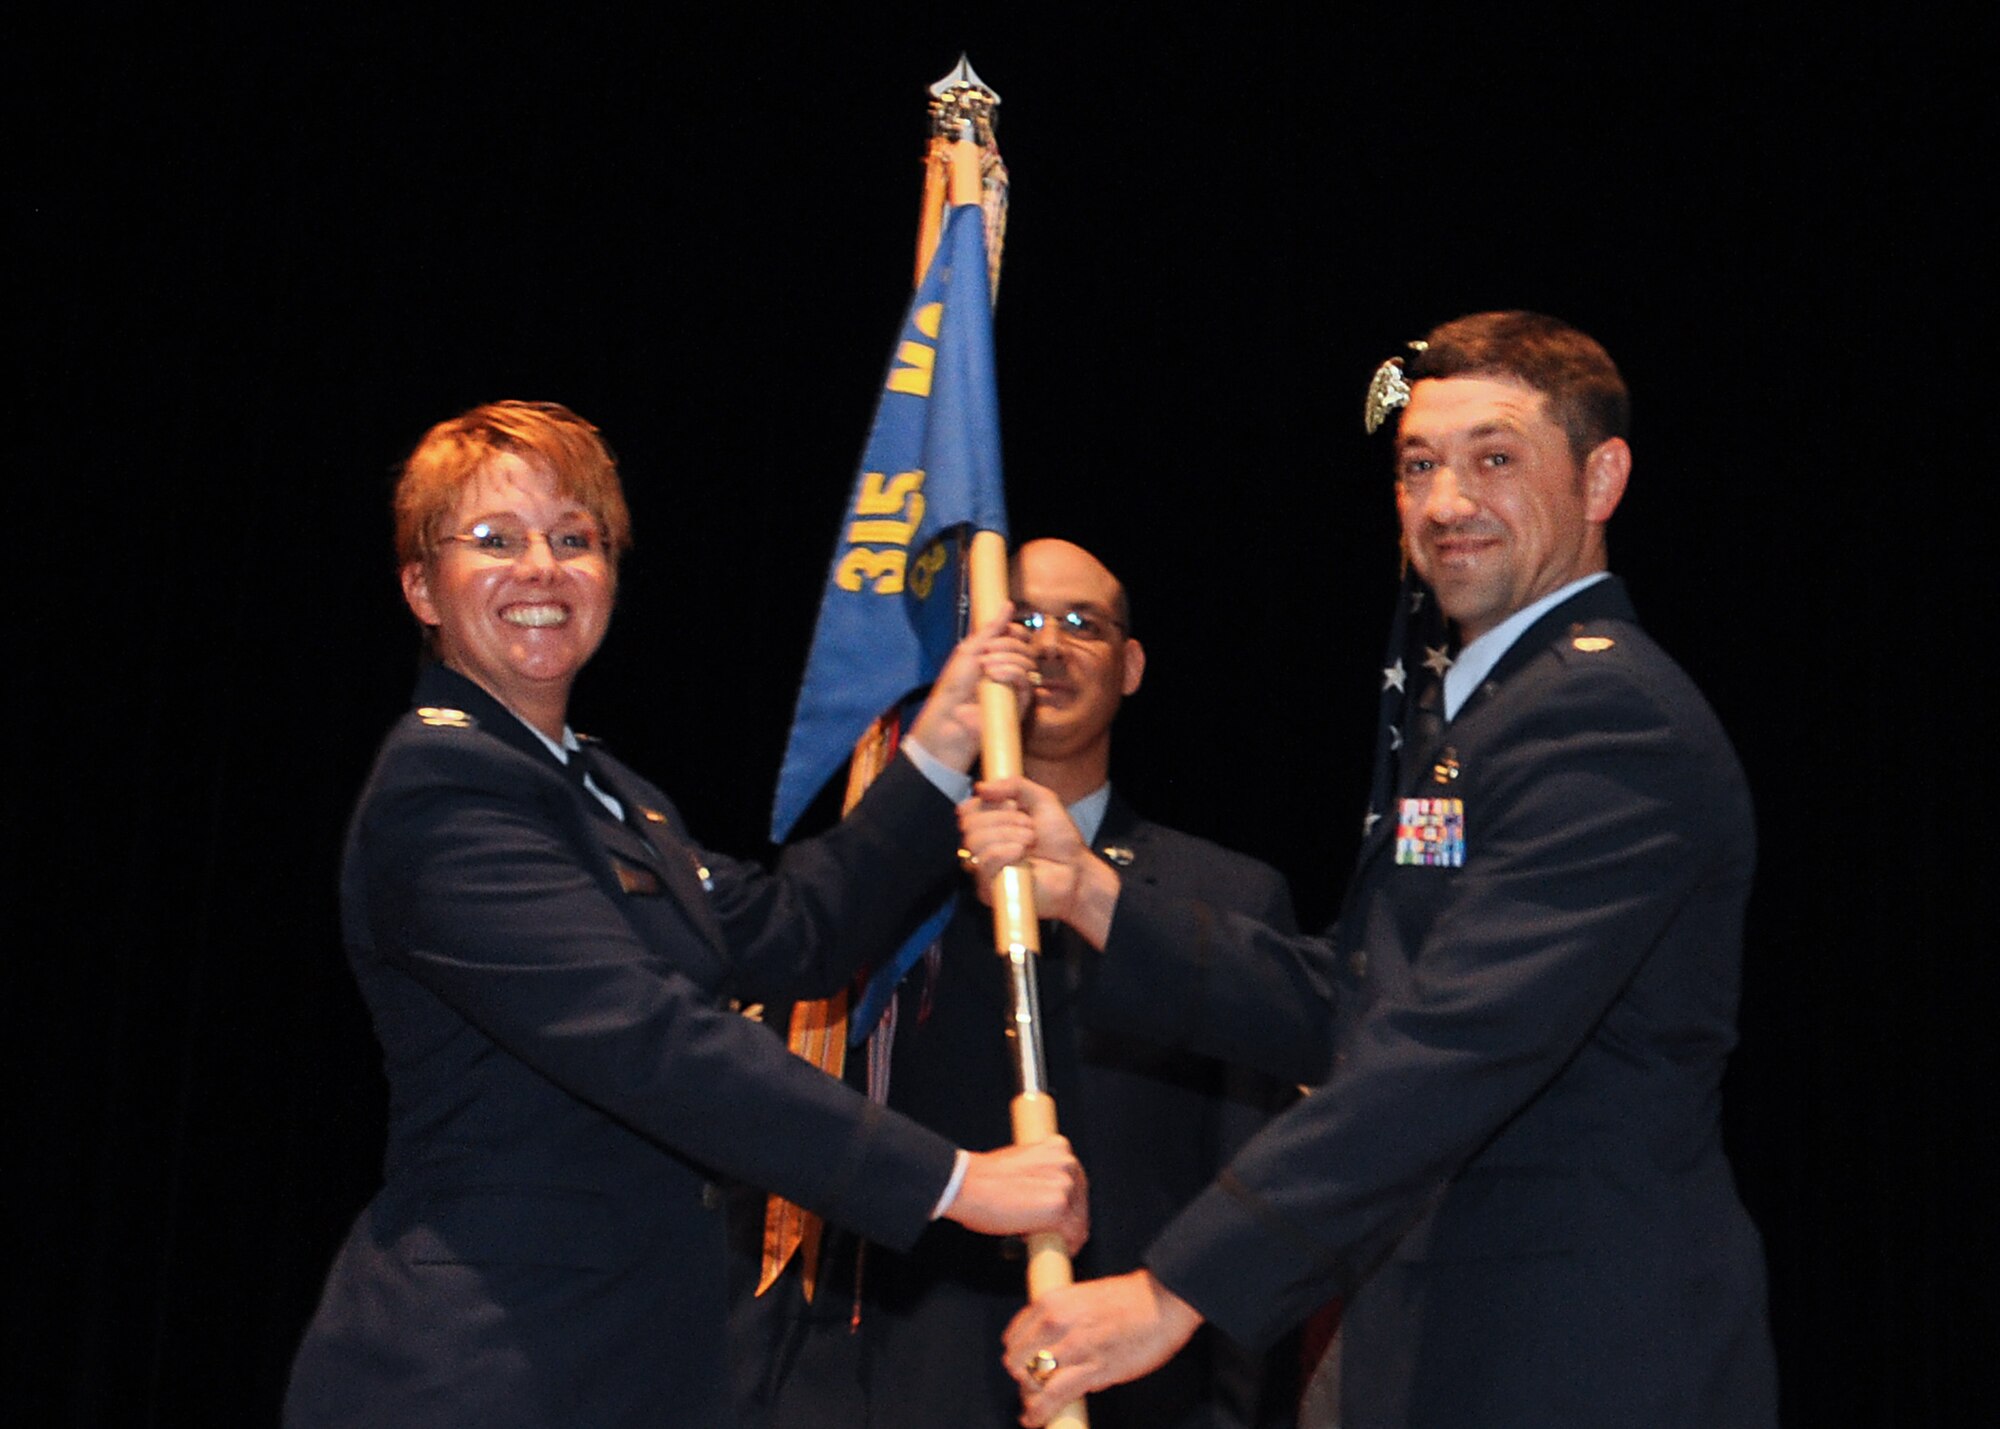 Col. Cherie Roff, 315th Mission Support commander, passes the guidon to Lt. Col. Wesley Maxwell, new 38th Aerial Port Squadron commander, during an change of command ceremony at Joint Base Charleston, S.C. Sept. 13, 2015. (U.S. Air Force Photo by Senior Airman Tom Brading)